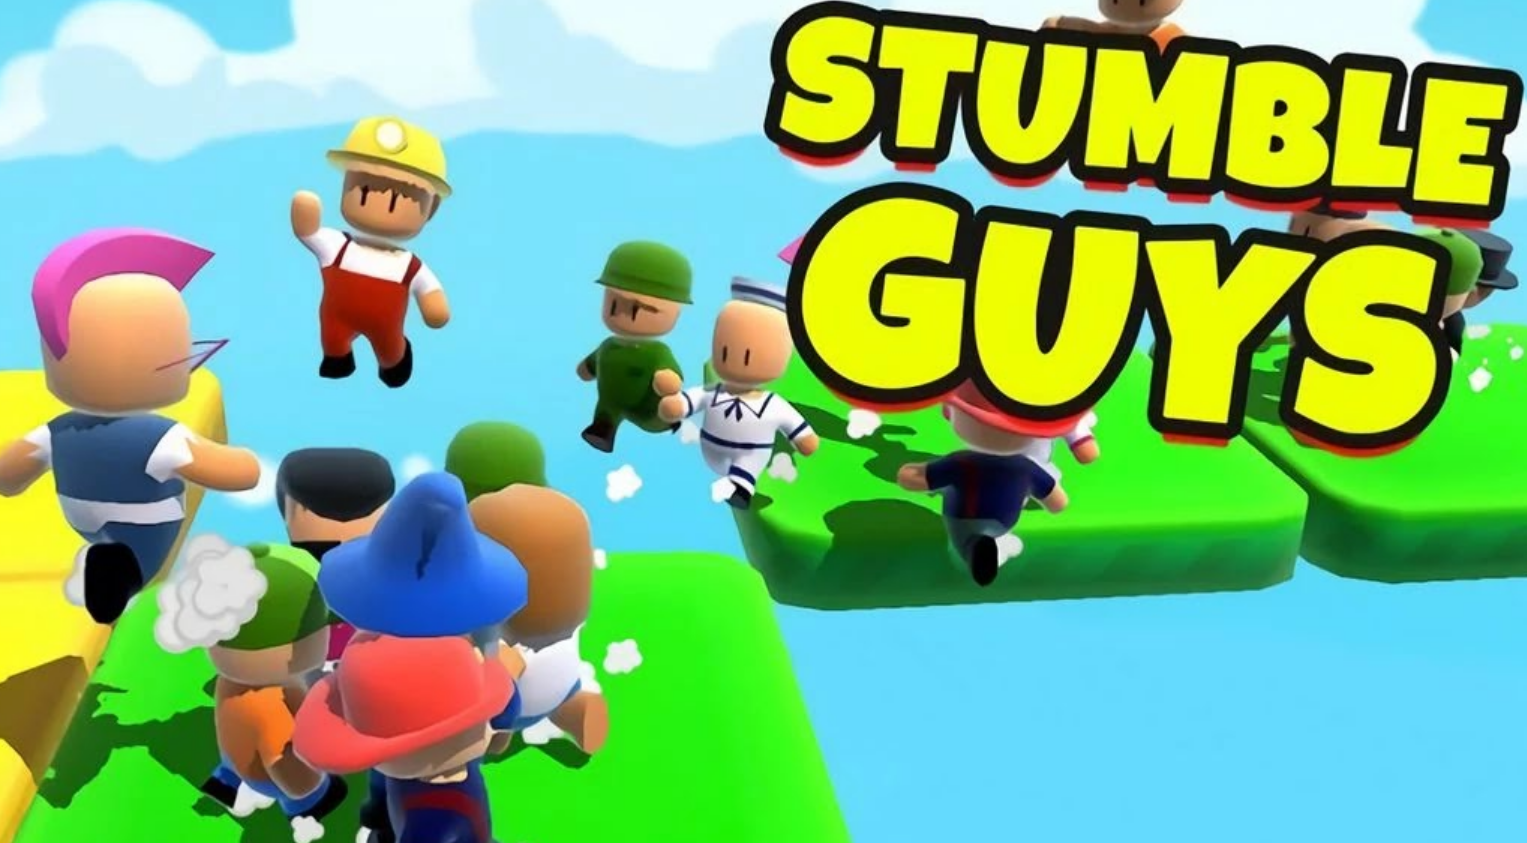 Stumble Guys Finds Its Footing